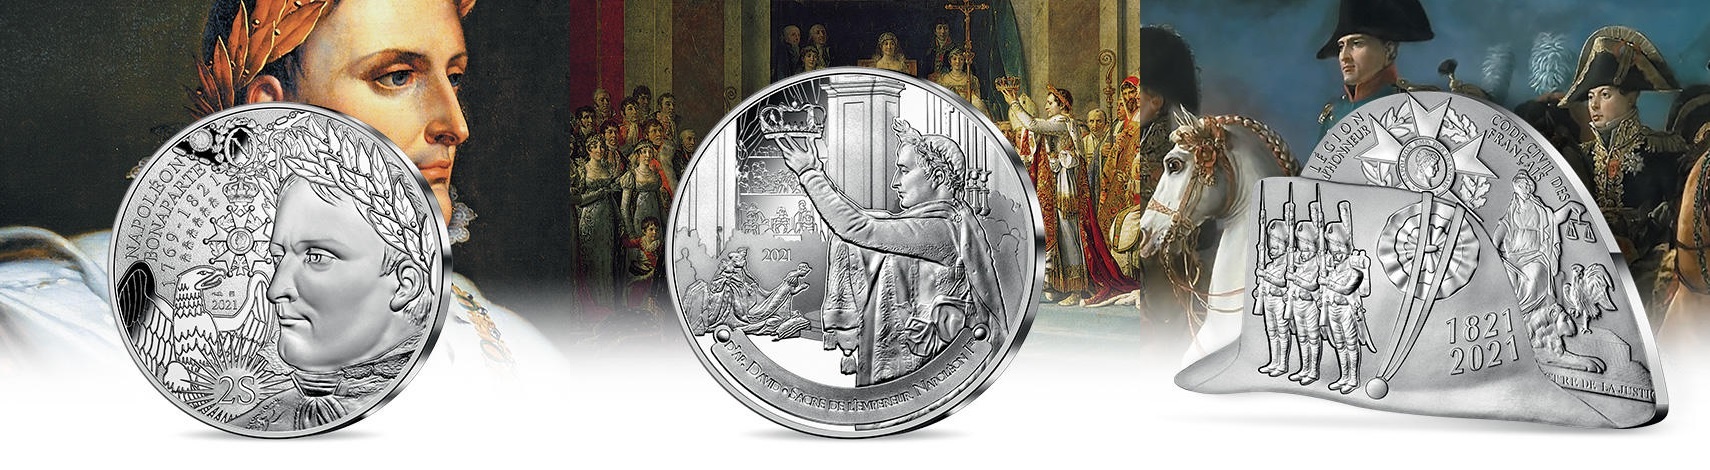 France Bicentenary of the death of Emperor Napoléon I (shop illustration) (zoom)